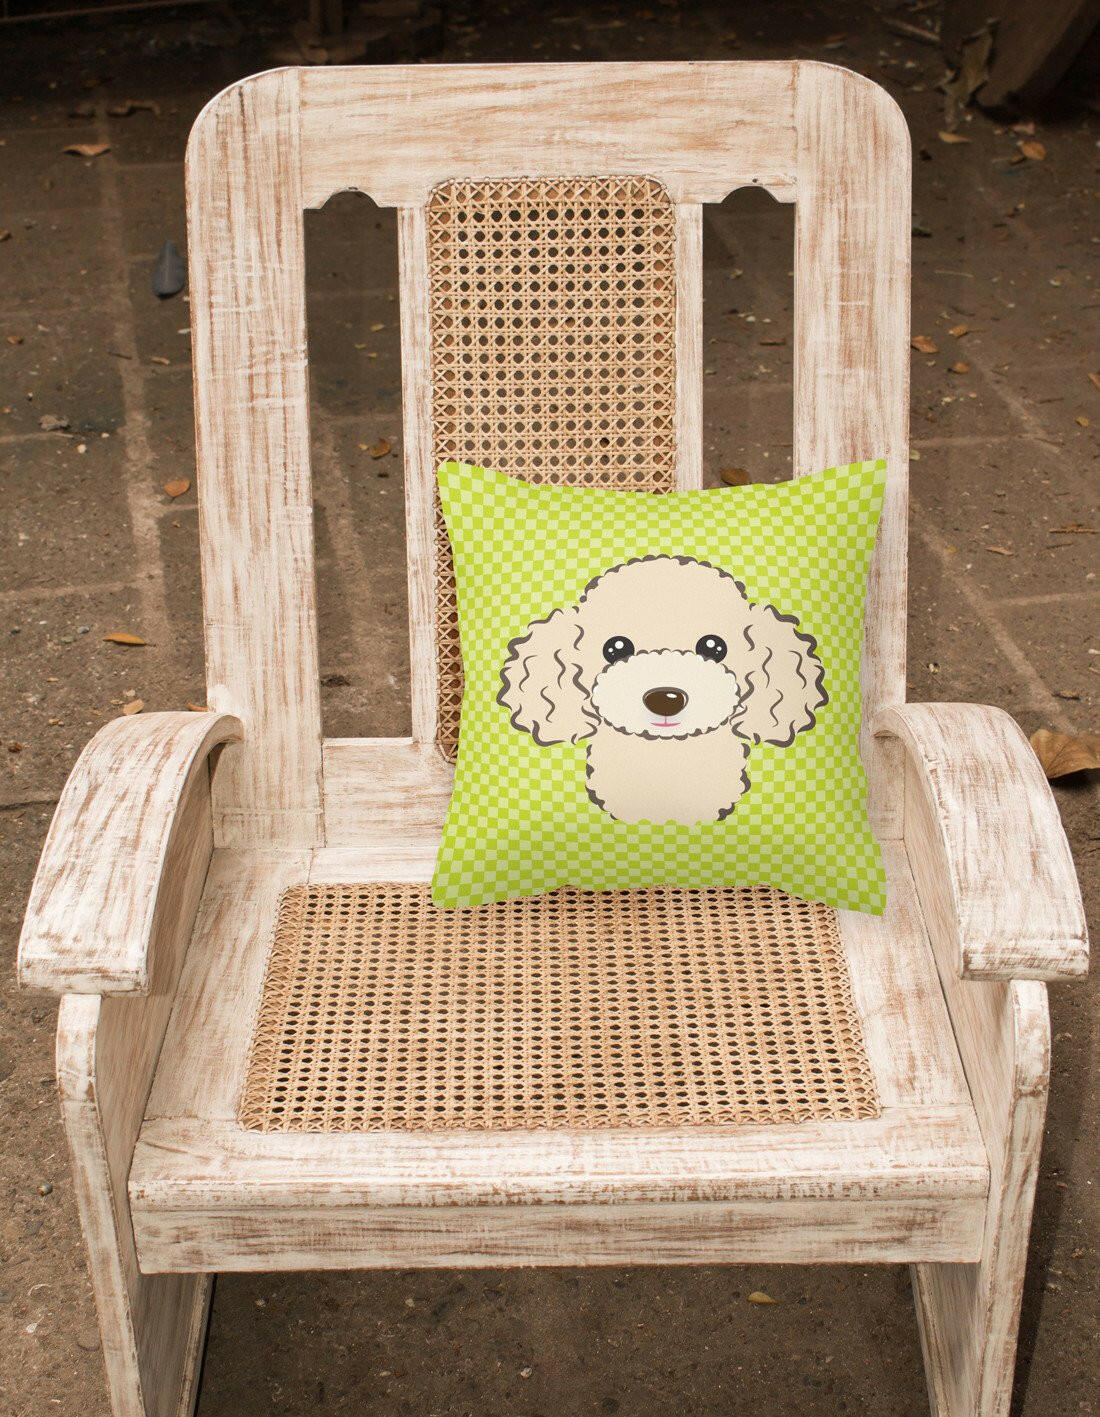 Checkerboard Lime Green Buff Poodle Canvas Fabric Decorative Pillow BB1320PW1414 - the-store.com